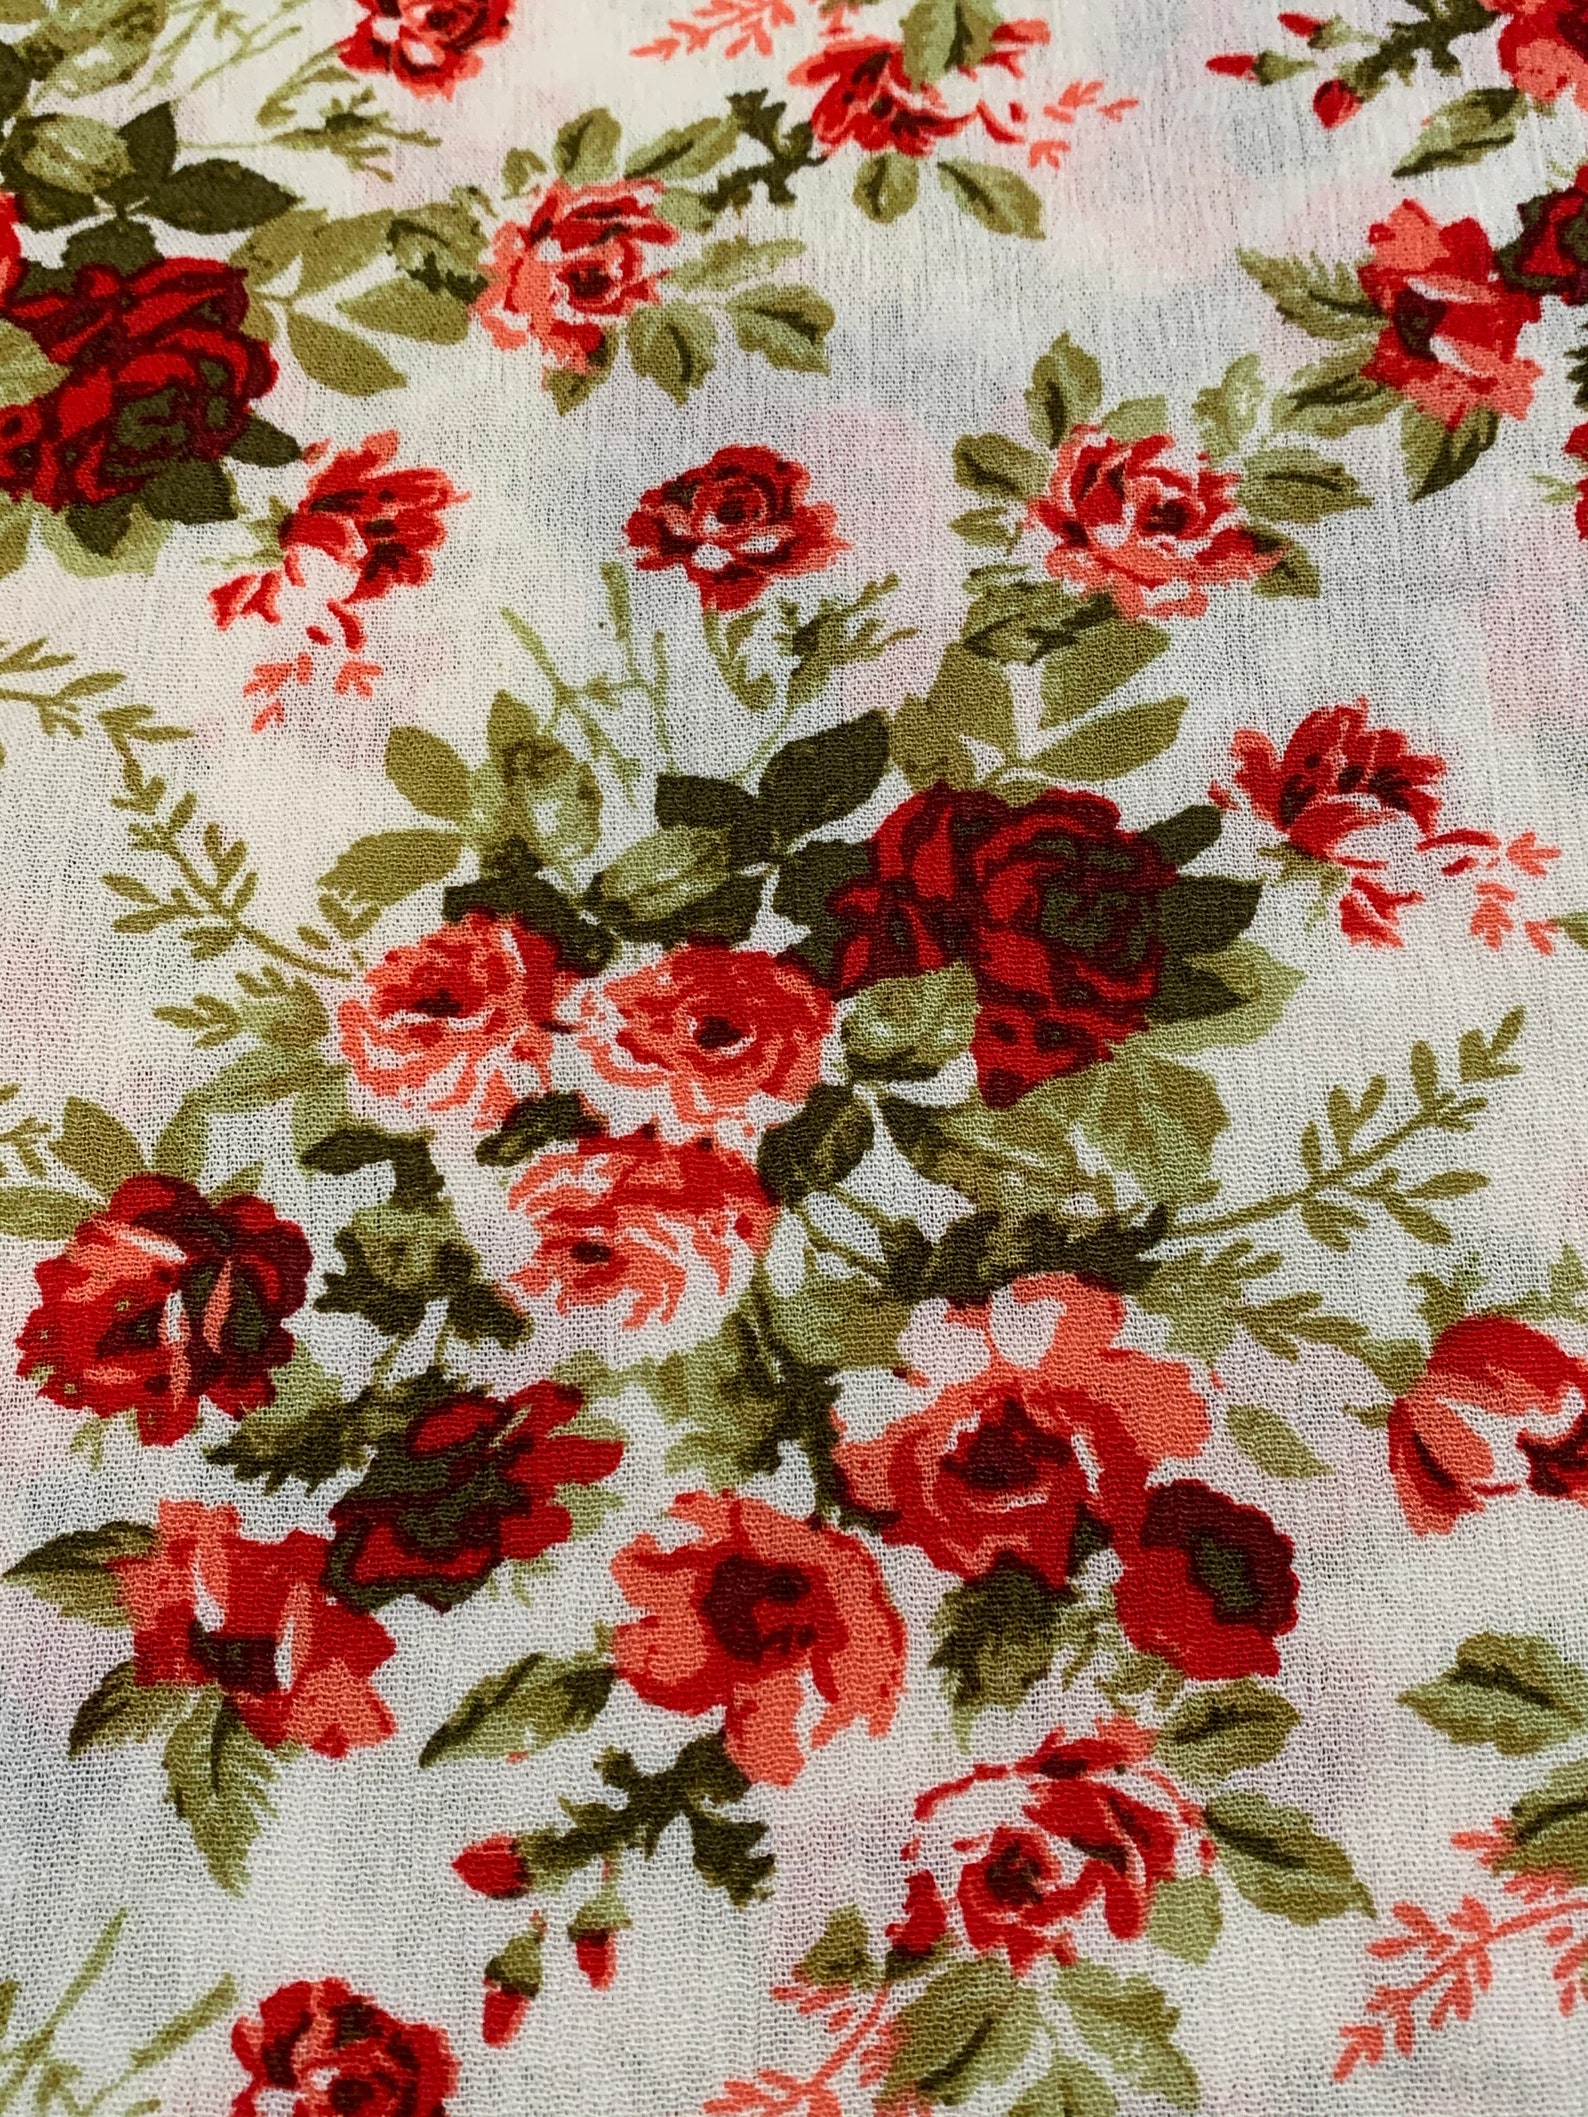 White With Red Floral Cotton Gauze Fabric 54 Wide Sold - Etsy